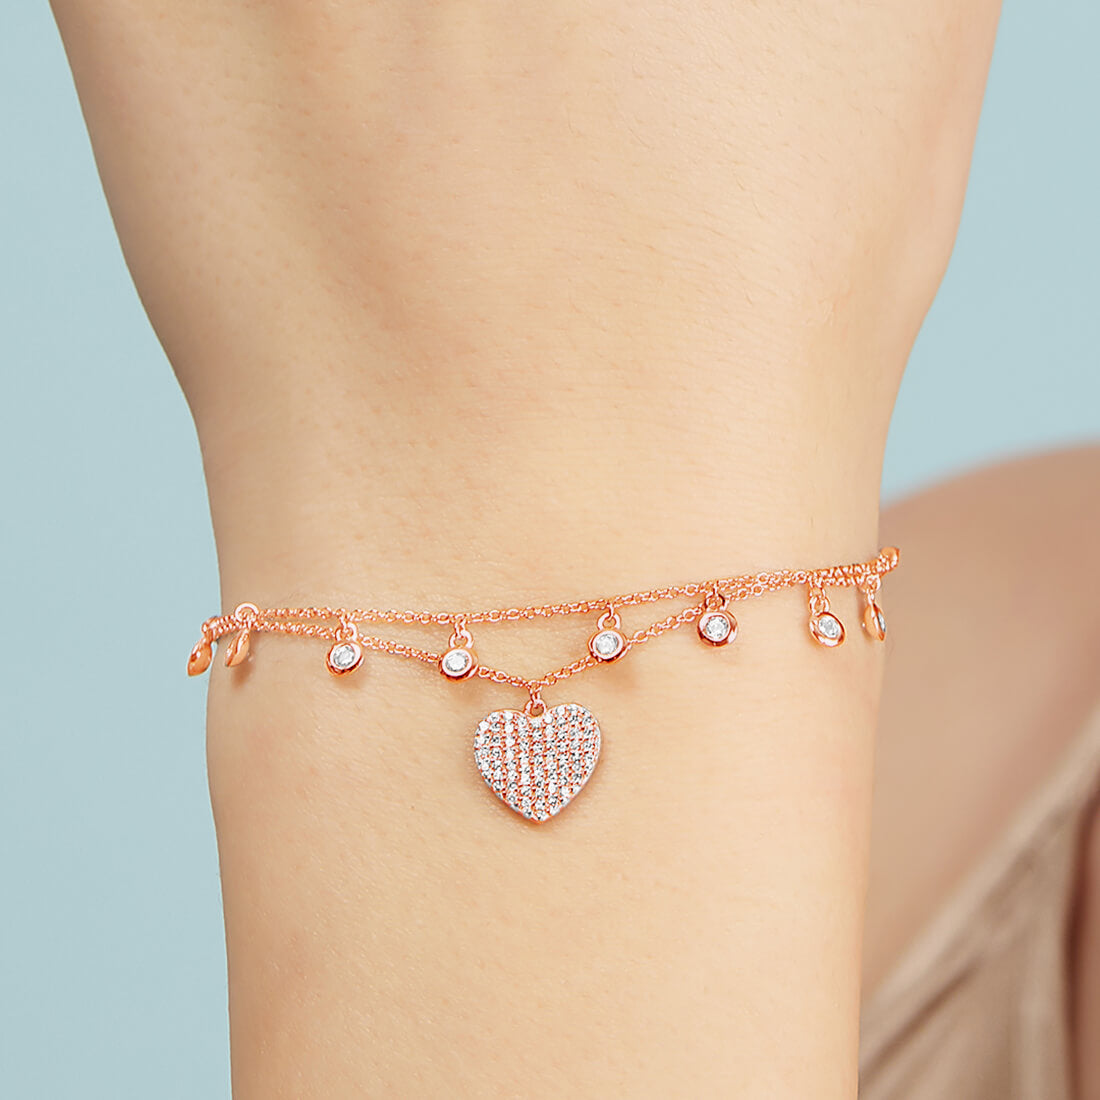 Truly Captivating Heart Charms 925 Silver Bracelet in Rose Gold